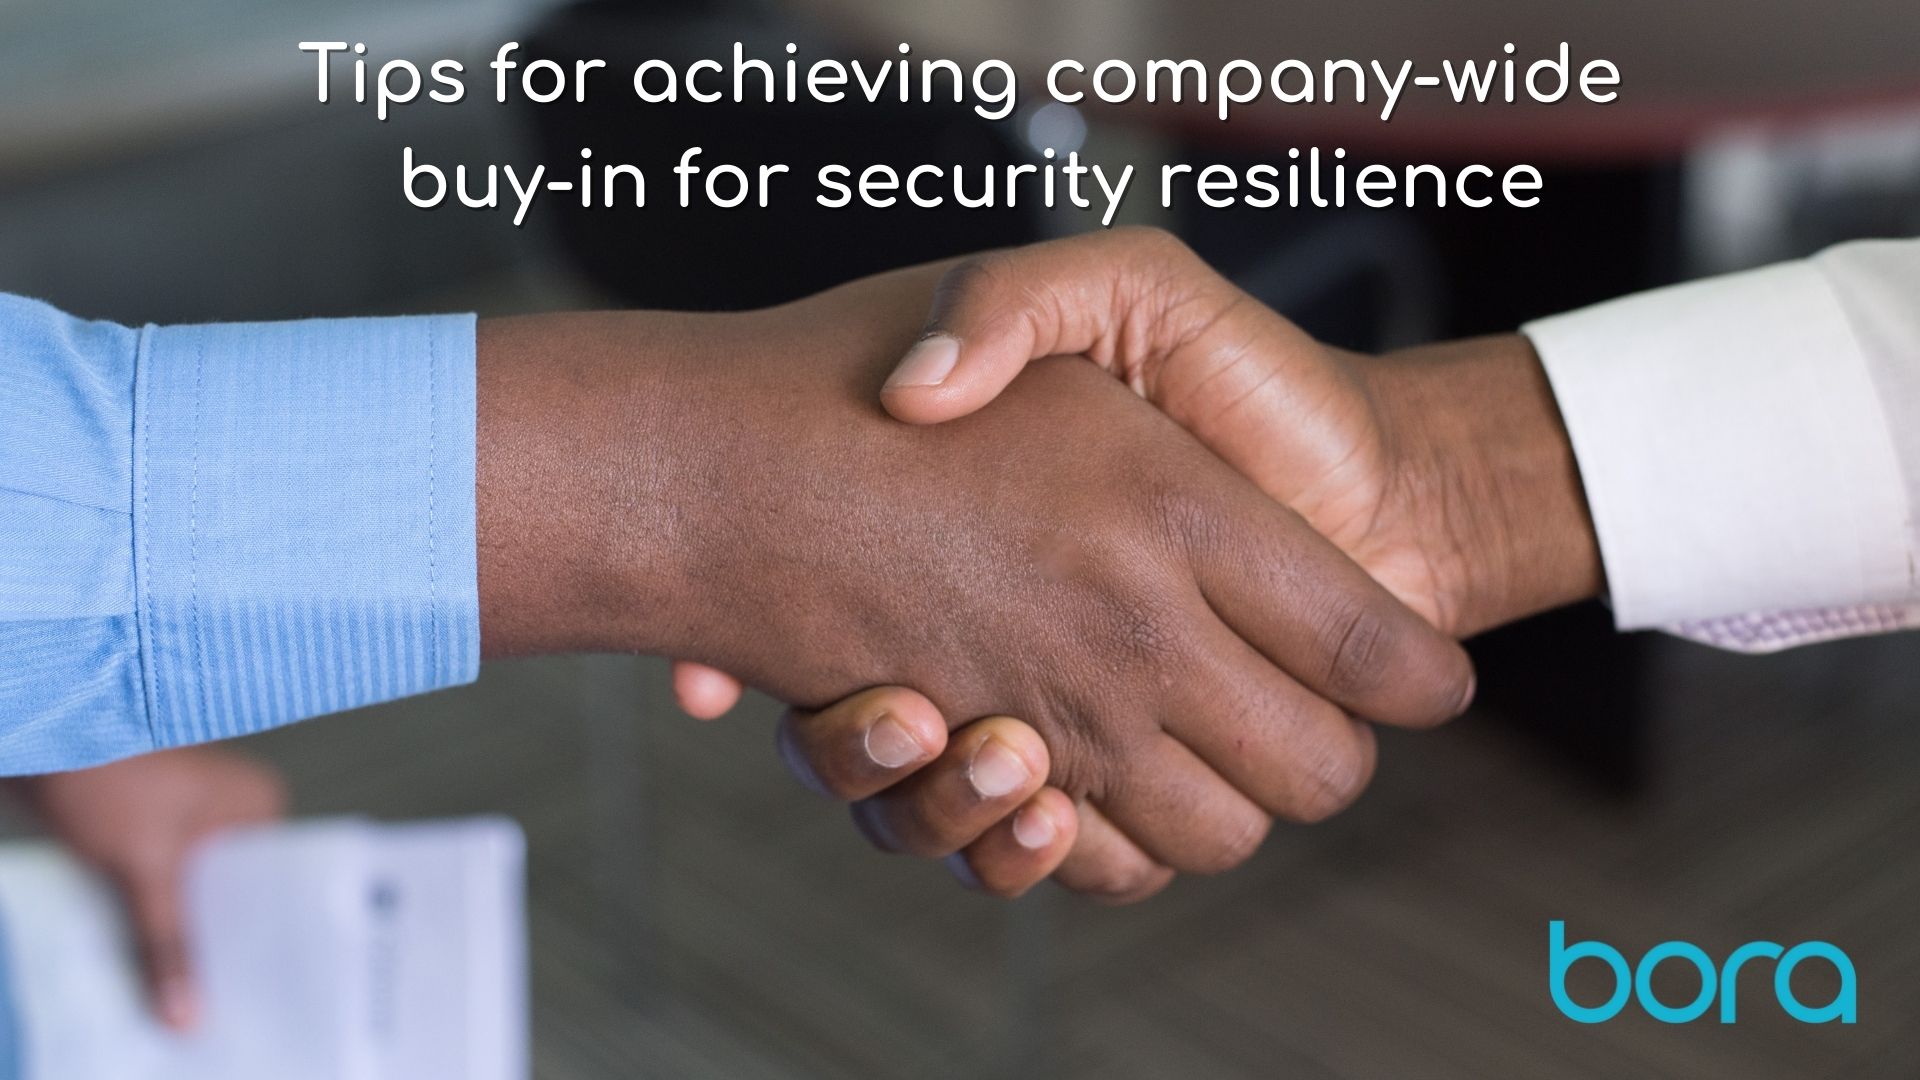 Tips for achieving company-wide buy-in for security resilience